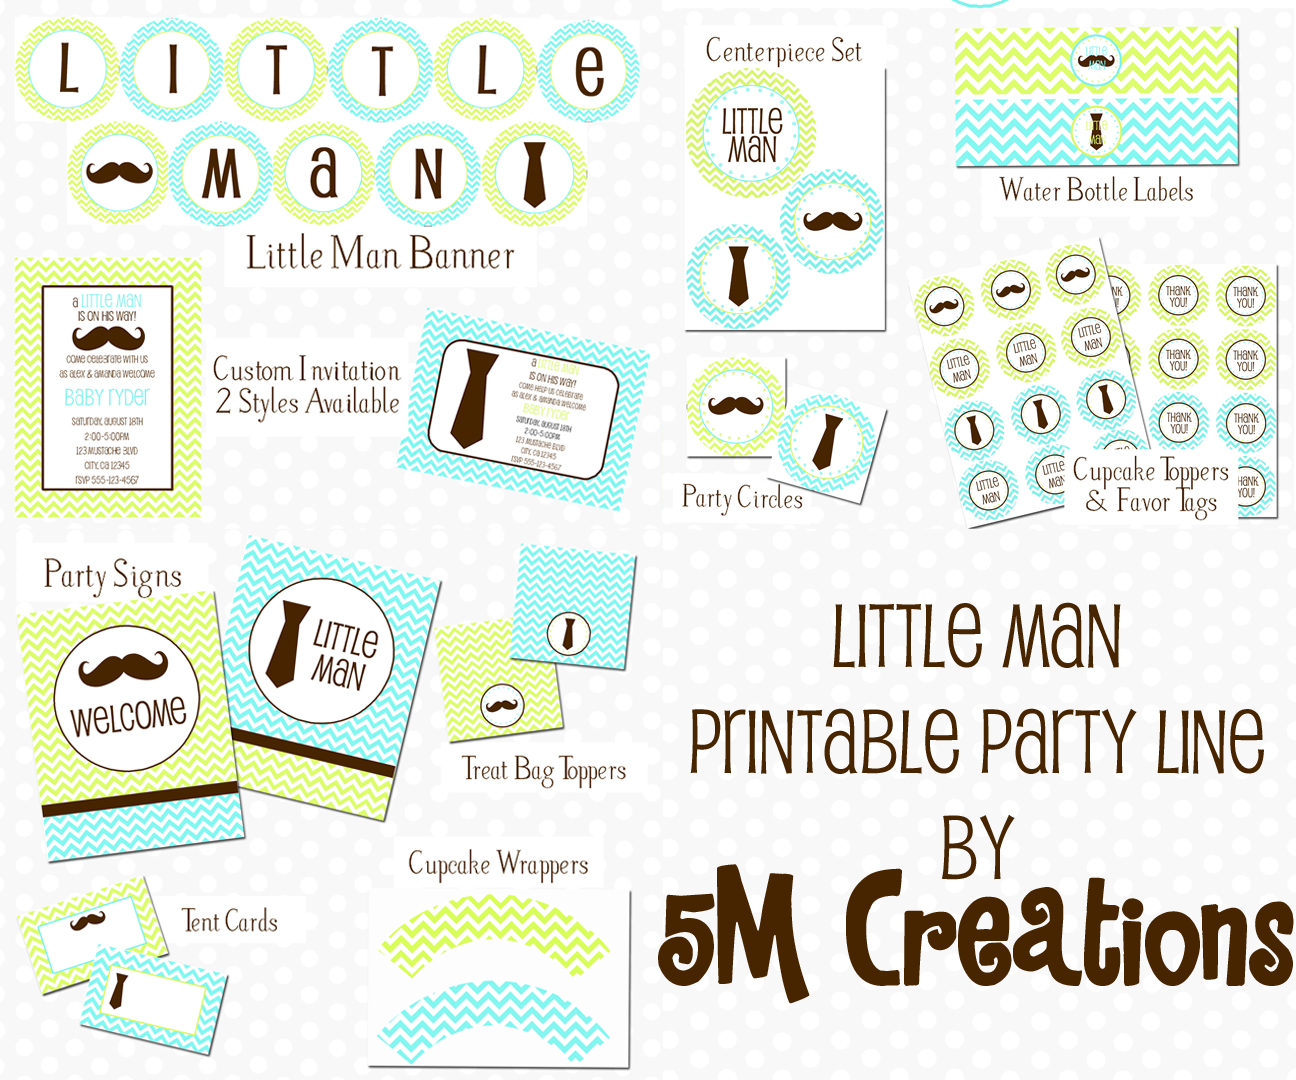 5M Creations: NEW Boy Printable Party Packages